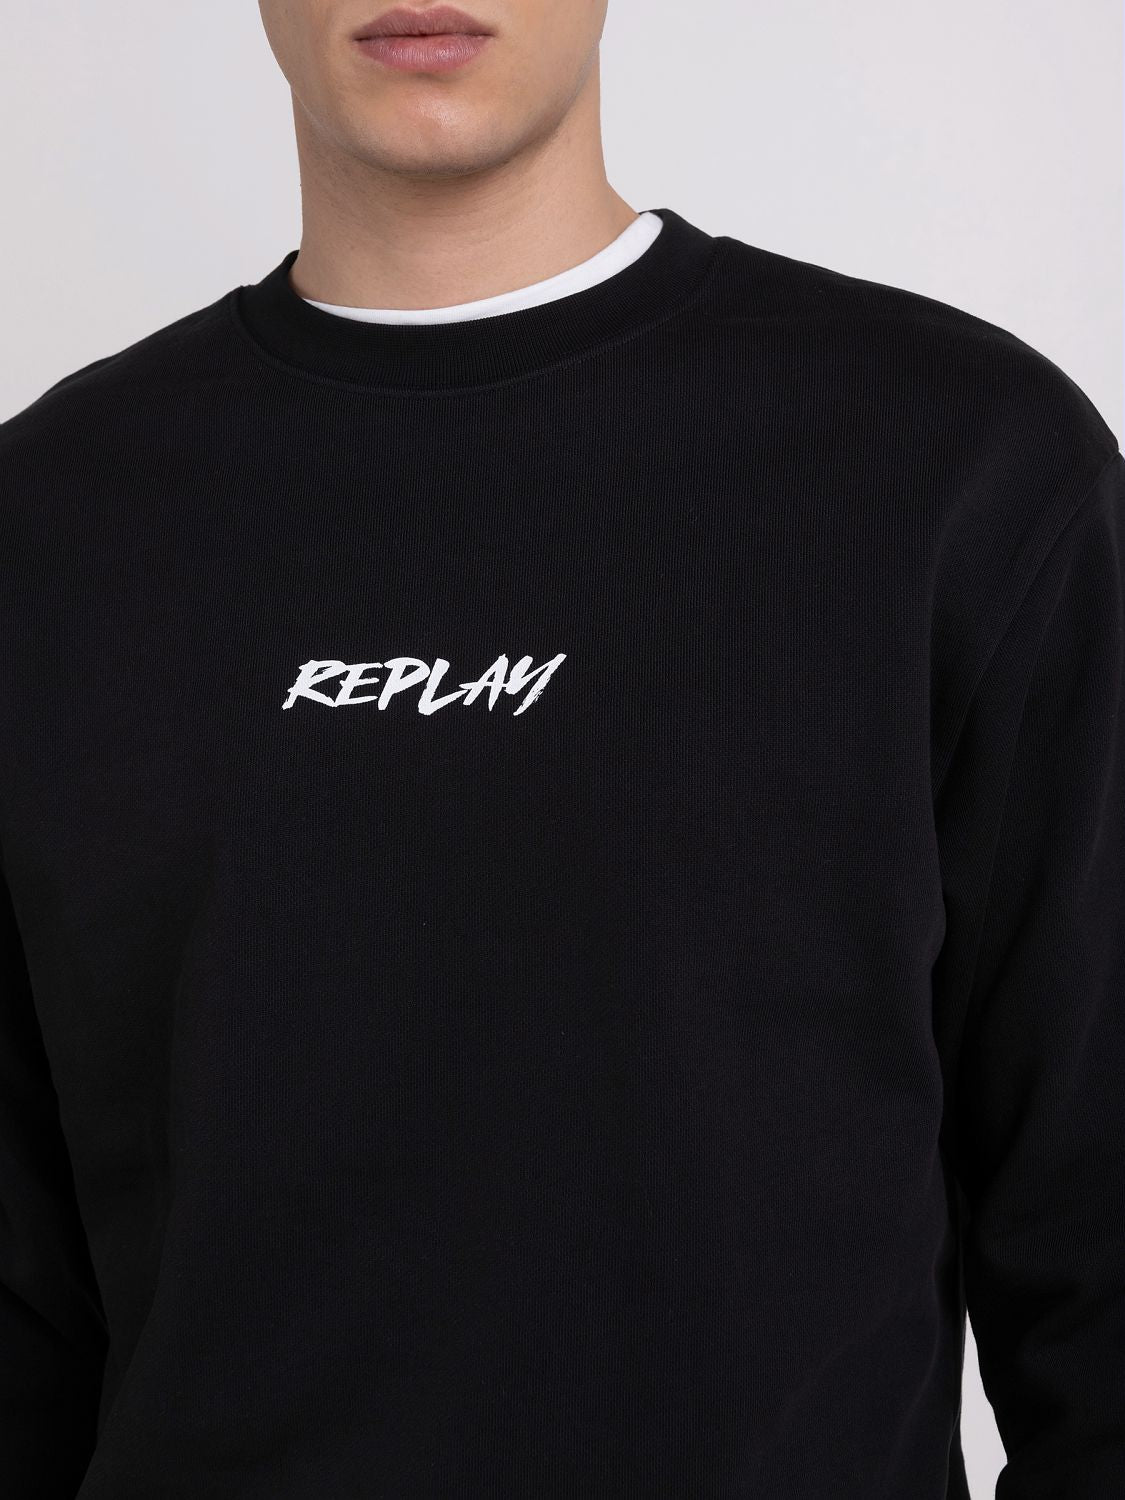 Relaxed Fit Crewneck Sweatshirt with Print